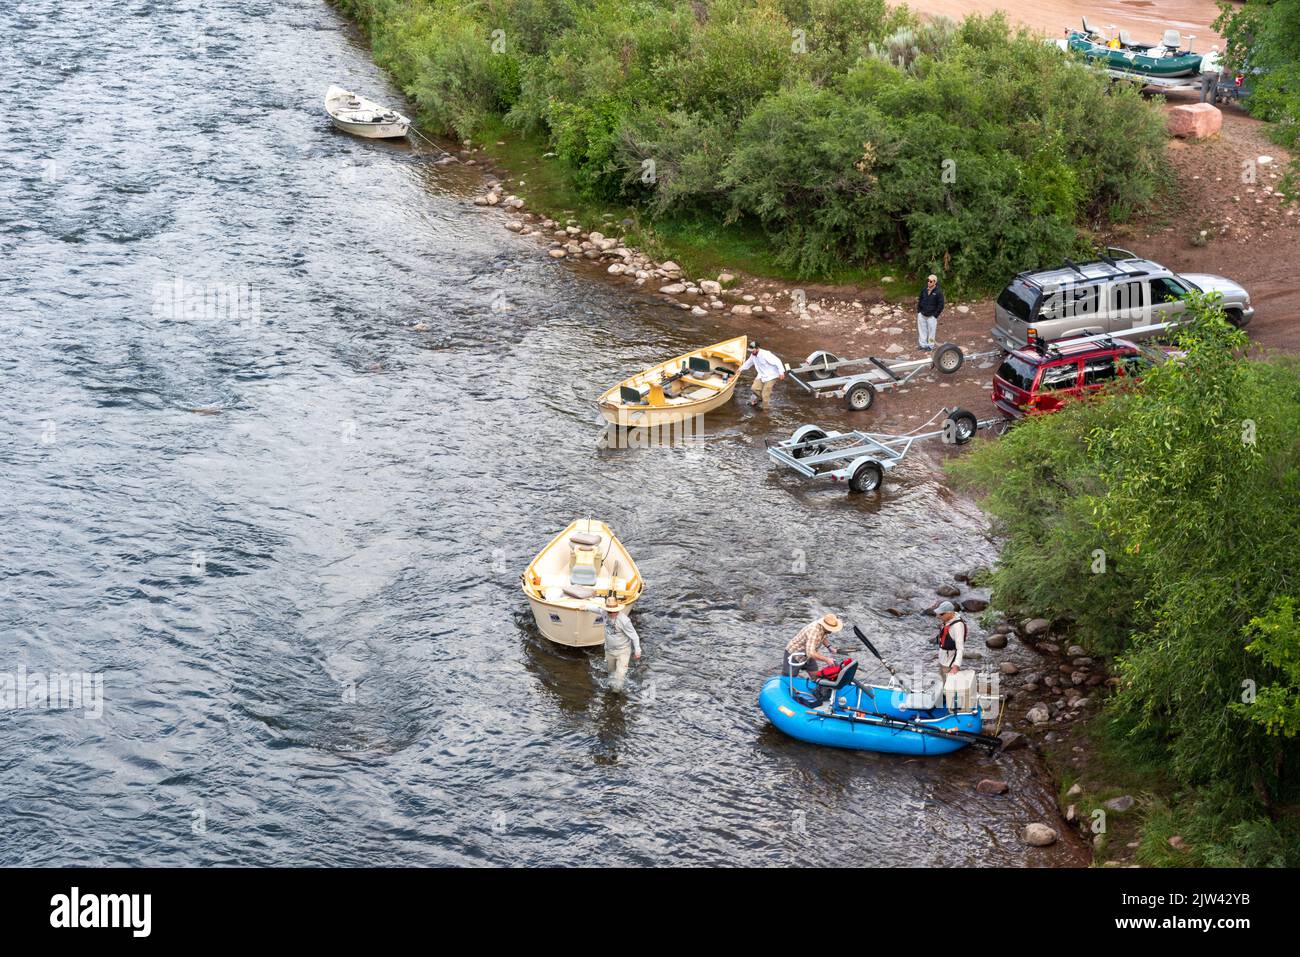 Two automobiles with trailers launching small fishing boats onto the Roaring Fork River in Carbondale, Colorado, USA. Stock Photo